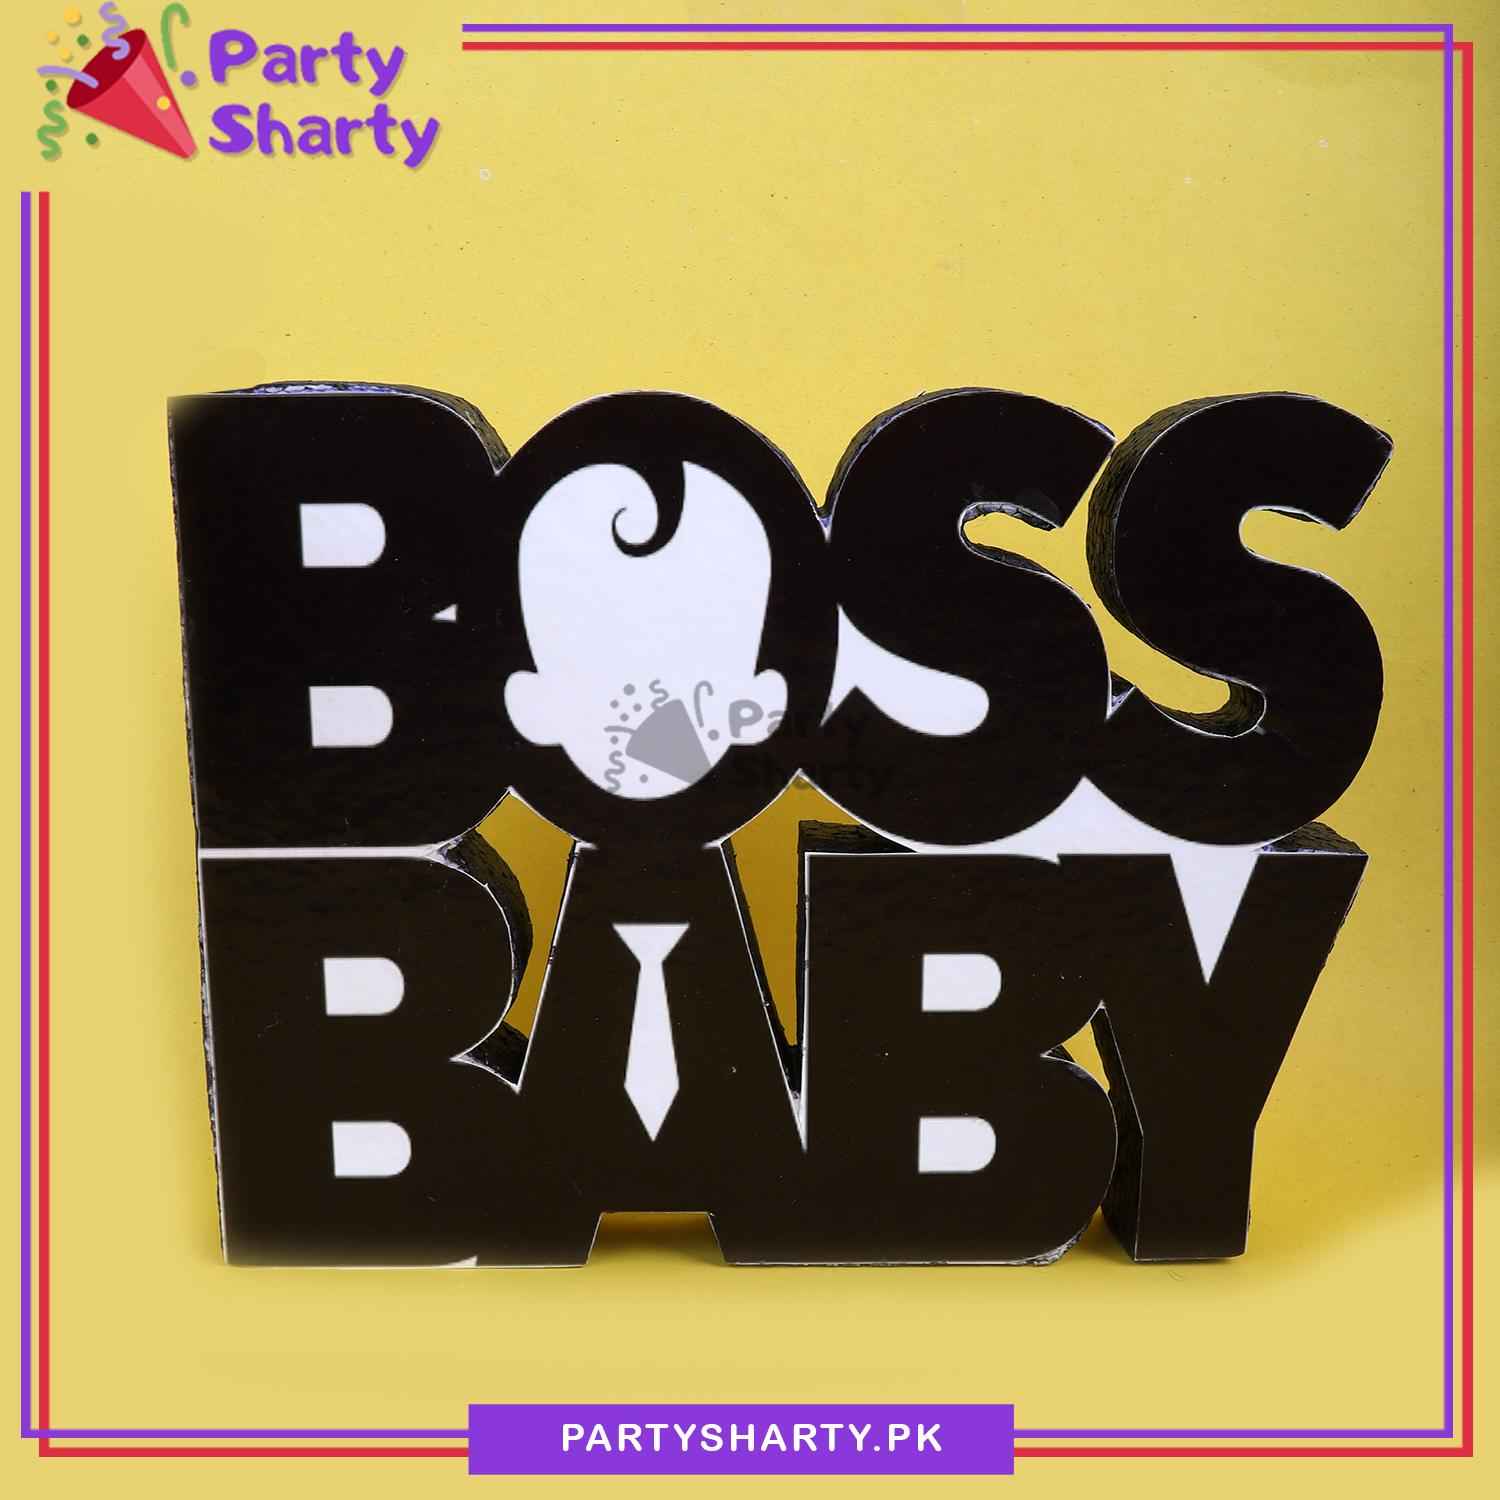 Boss Baby Title Thermocol Standee For Boss Baby Theme Based Birthday Celebration and Party Decoration